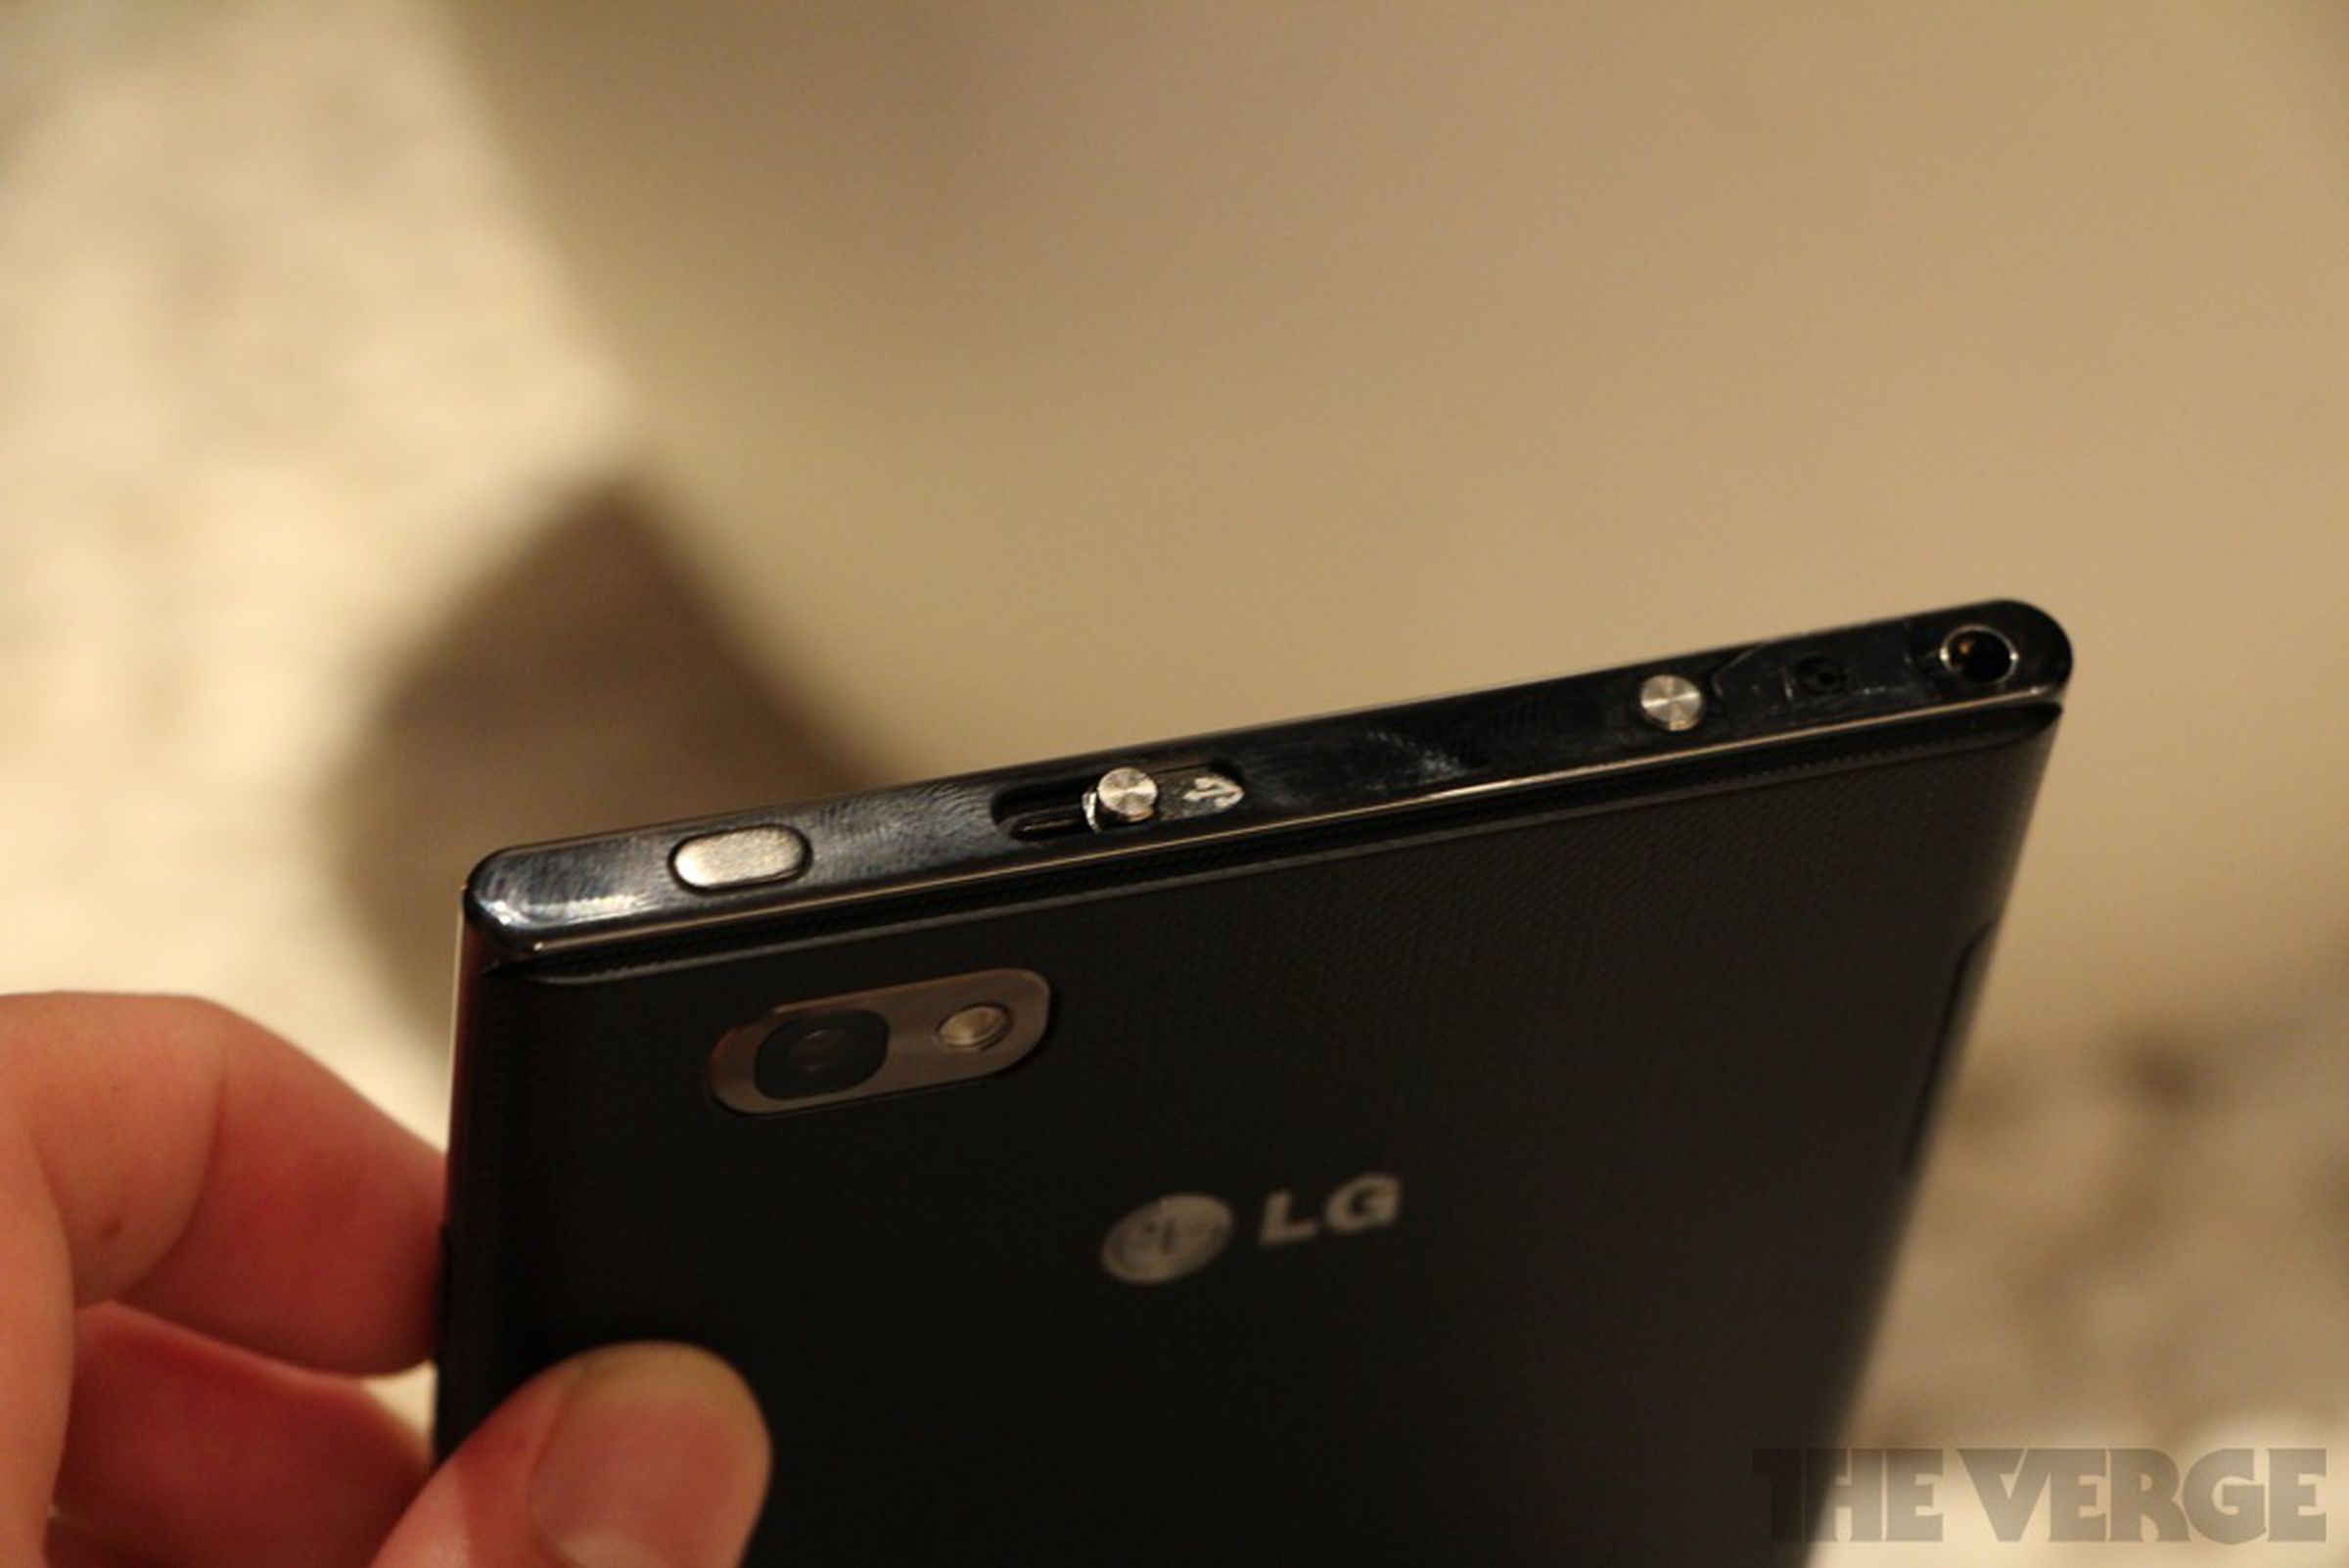 LG Intuition hands-on pictures